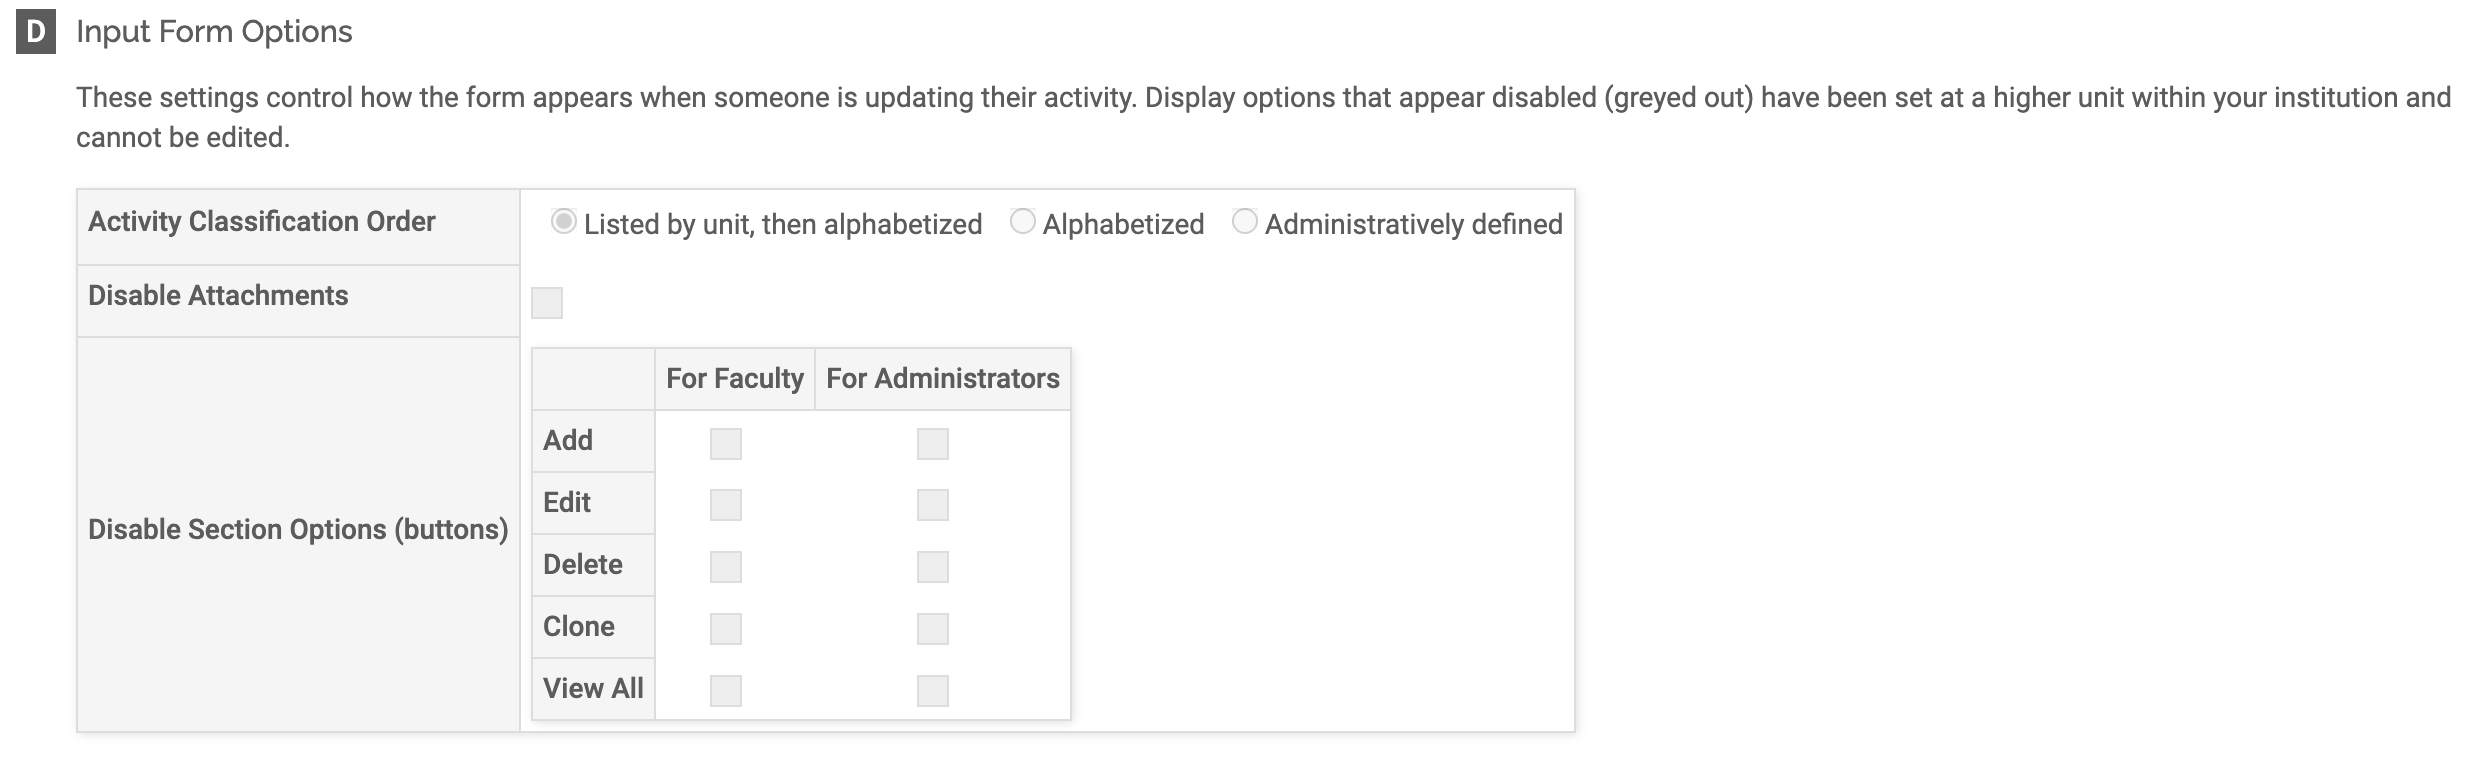 Input Form Options section with Disable Section Options at the bottom of the table. Add, Edit, Delete, Clone, and View all are rows with checkboxes adjacent to it.